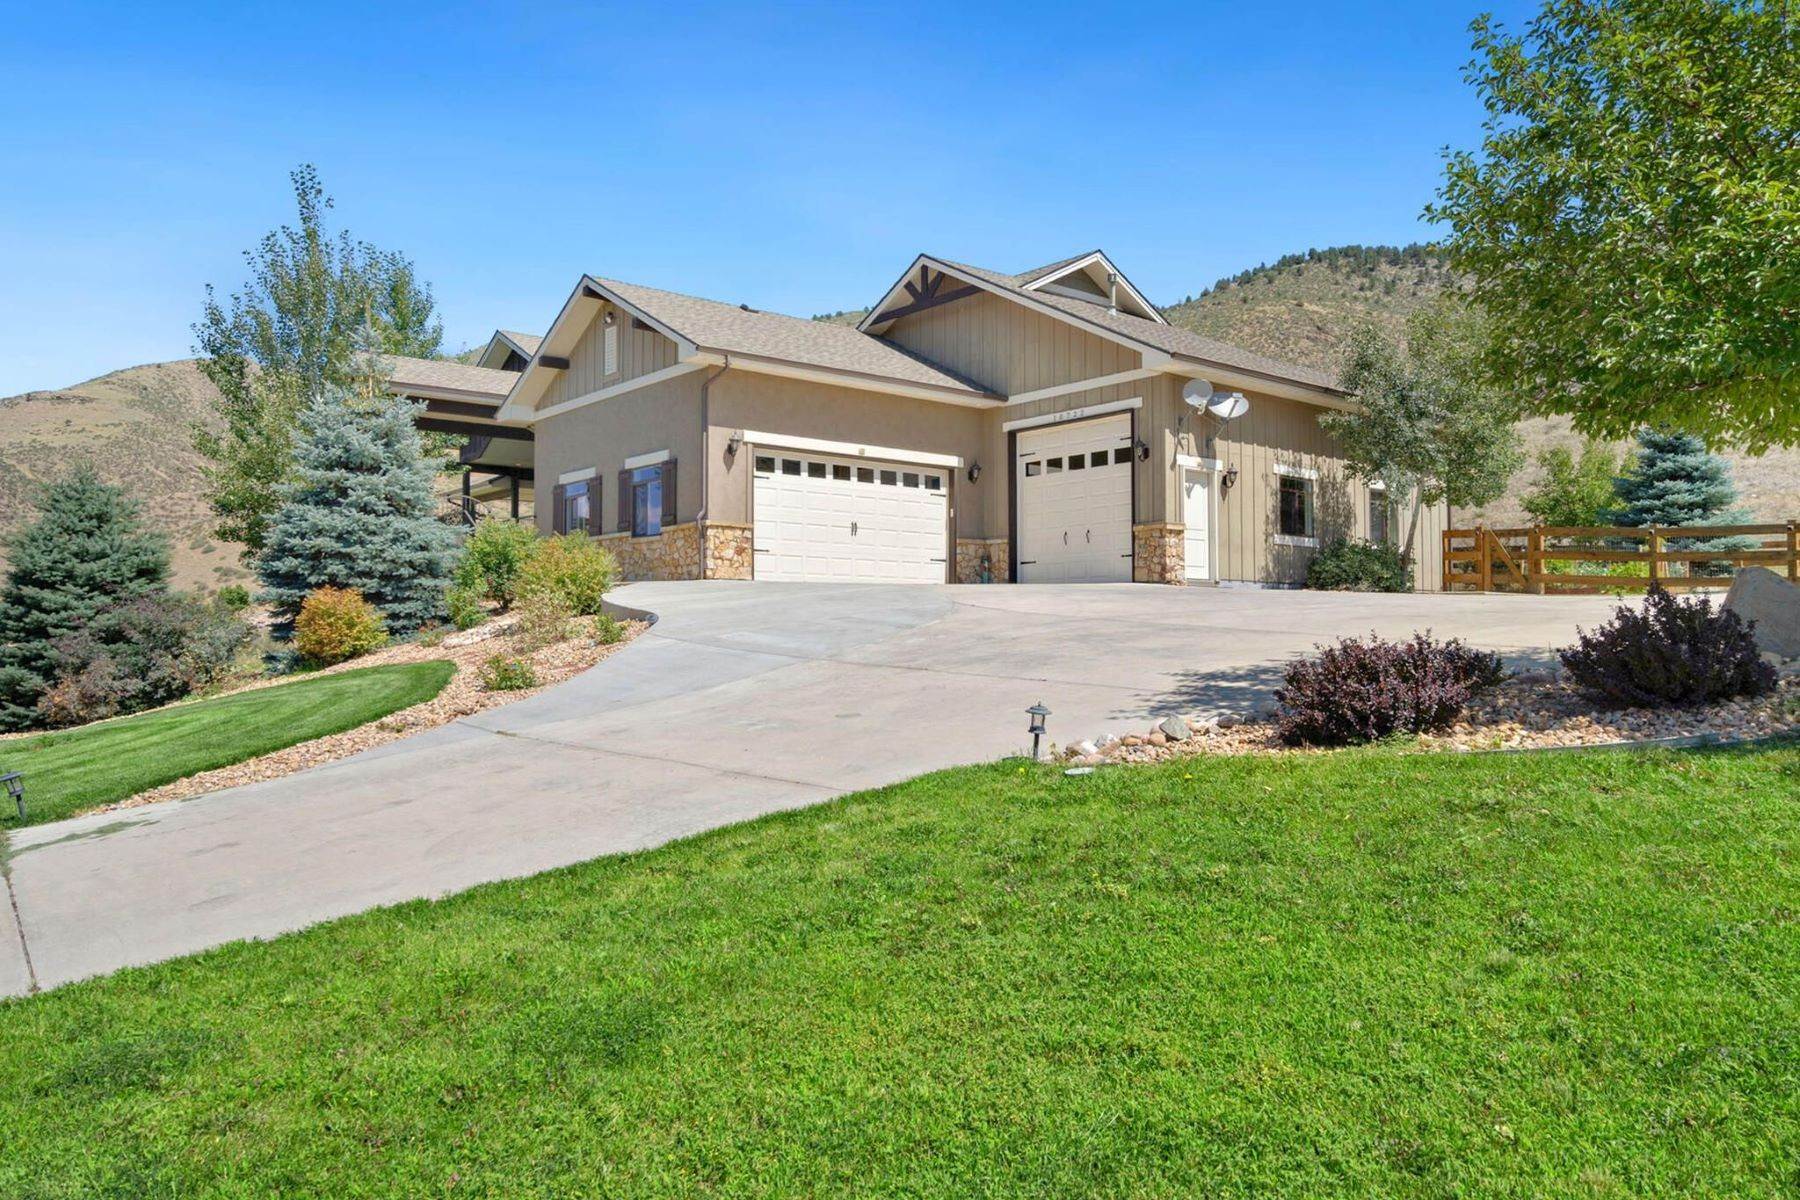 31. Single Family Homes for Active at Peaceful Living in Highly Sought After Buckhorn Ranch 10722 Buckhorn Ridge Way Loveland, Colorado 80538 United States